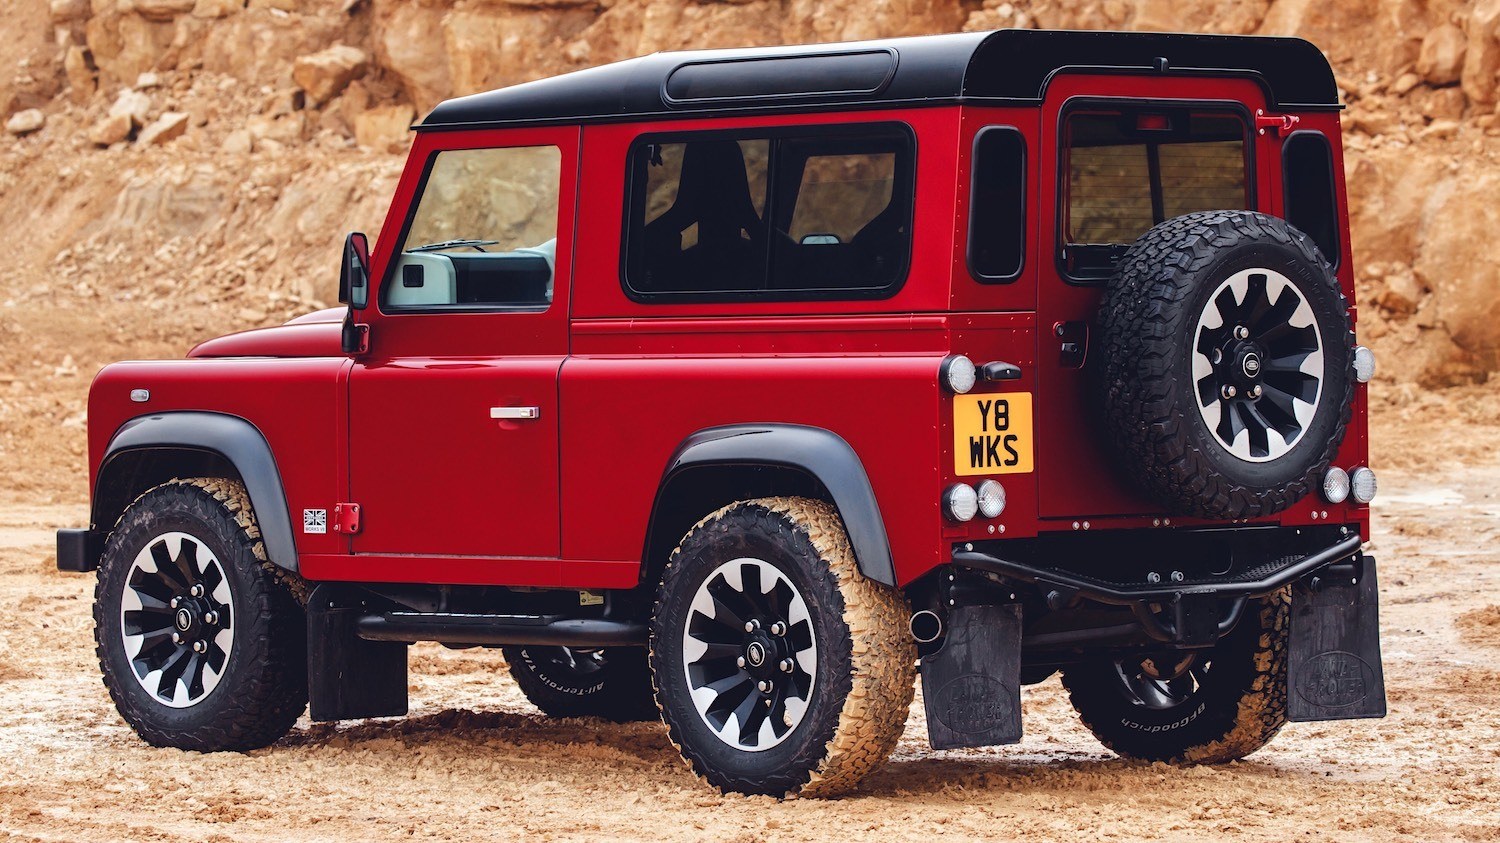 The latest 70th Edition Defender for the JPR 2018 70th Anniversary Celebrations 24